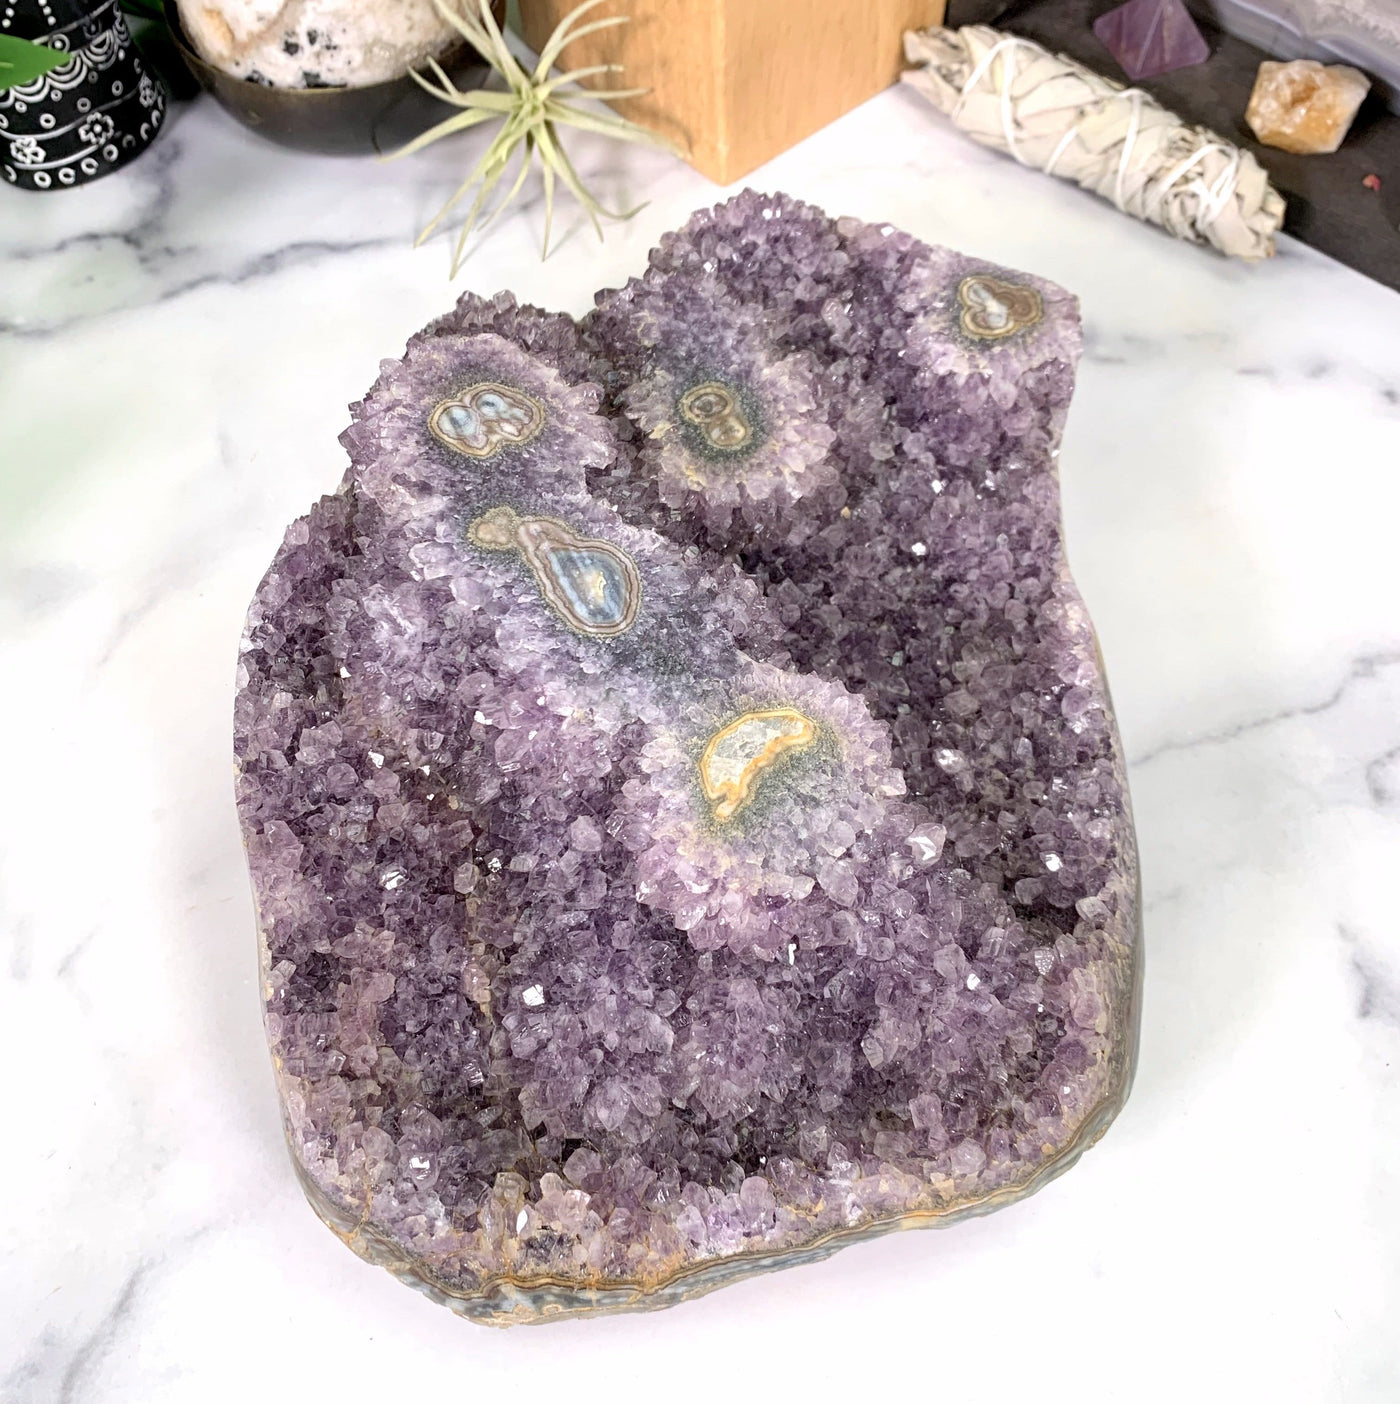 Different angle of the amethyst cluster.